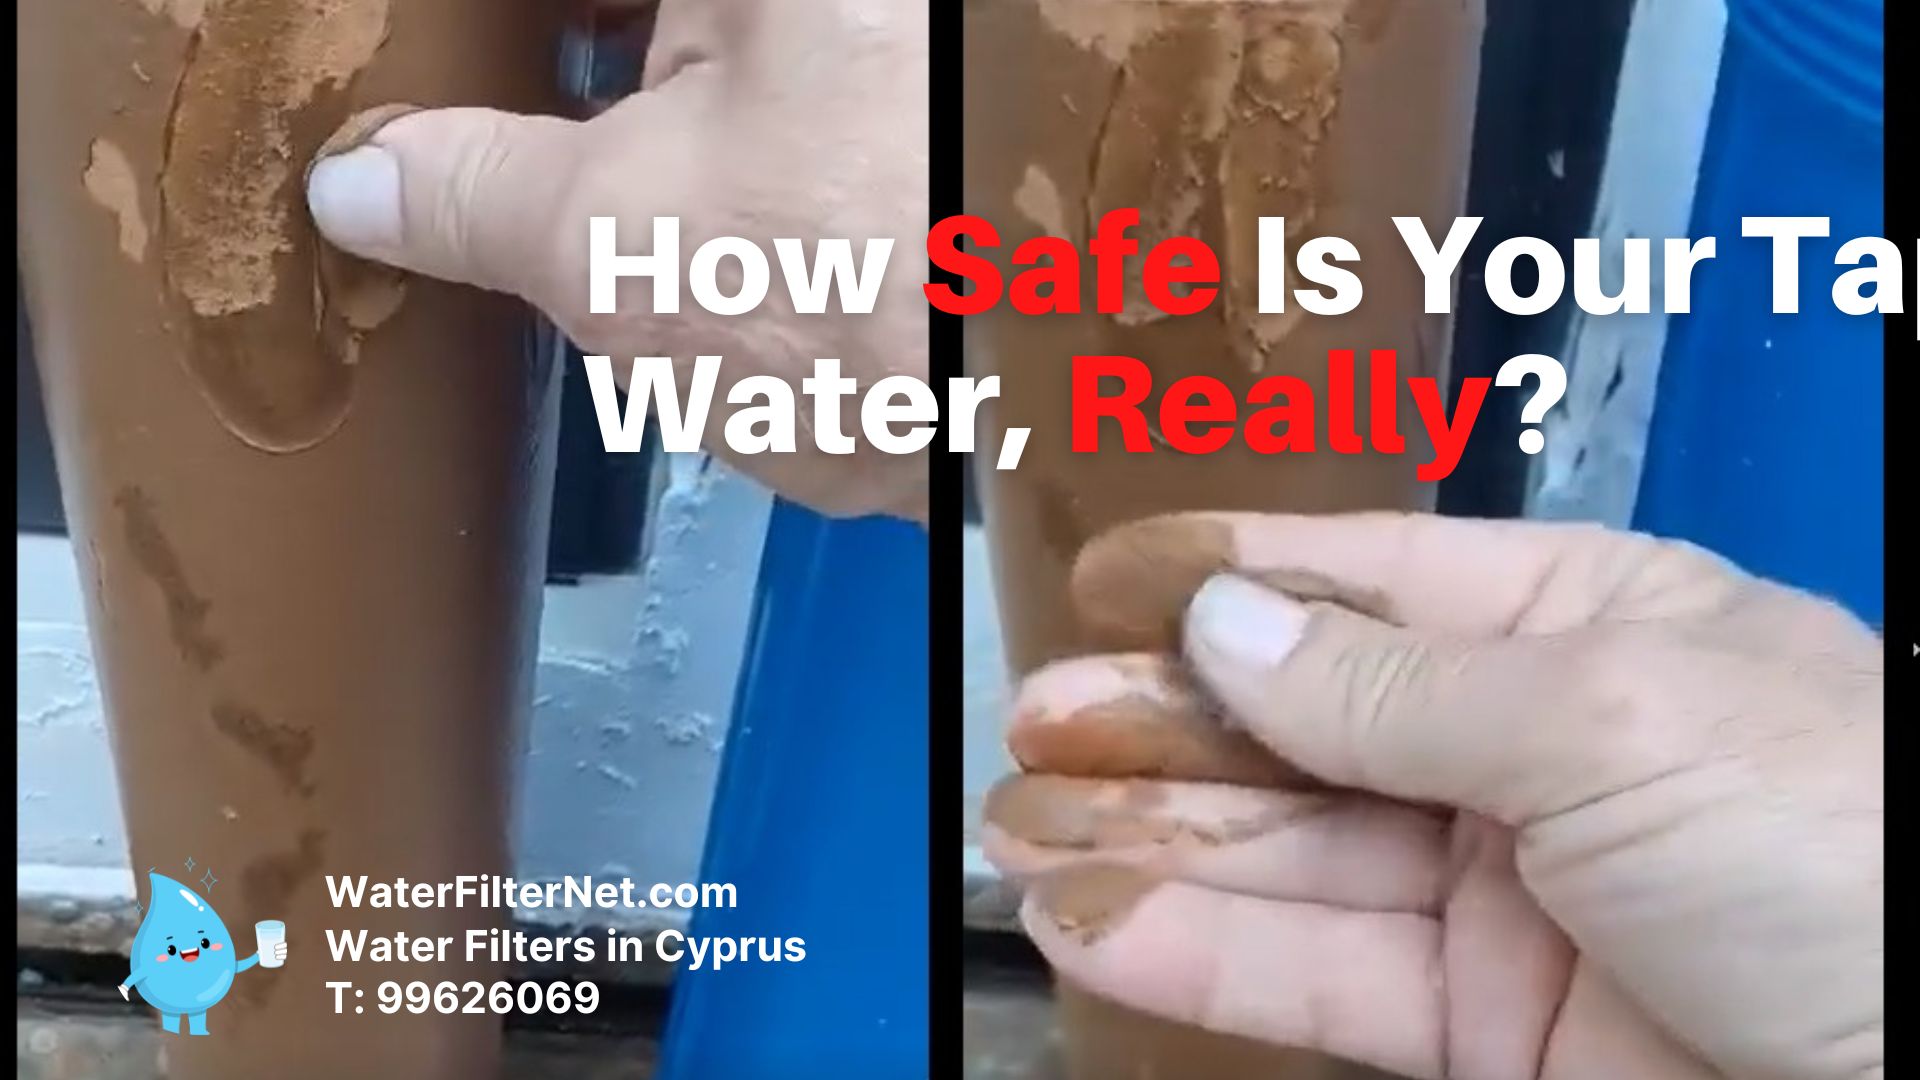 Exploring the Safety of Tap Water in Cyprus - WaterFilterNet.com